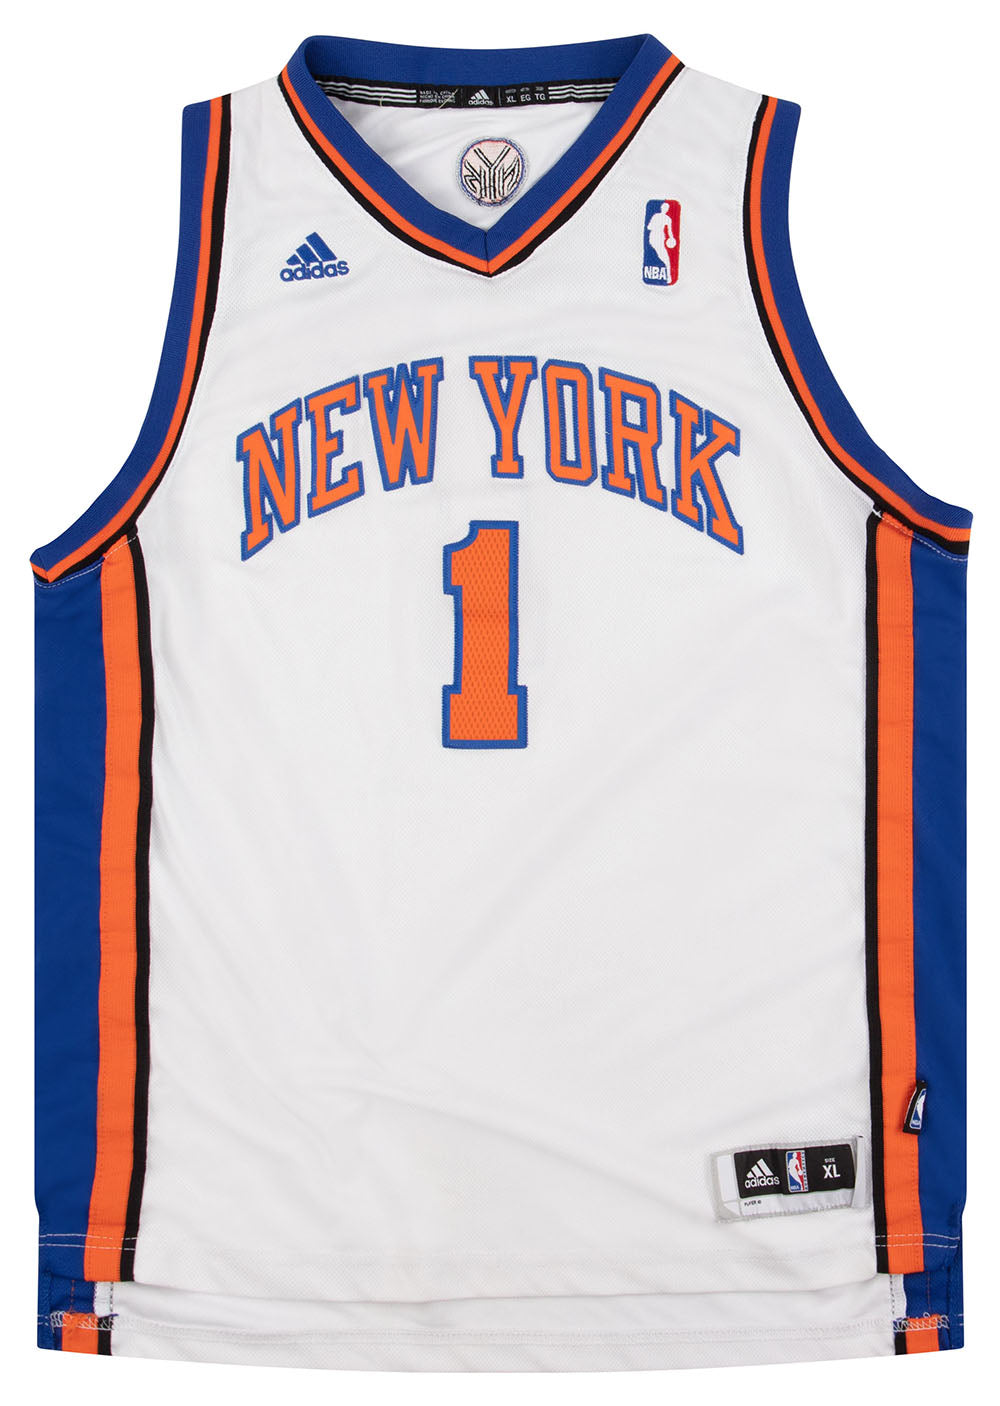 Squarespace Becomes First Knicks Jersey Sponsor - CBS New York